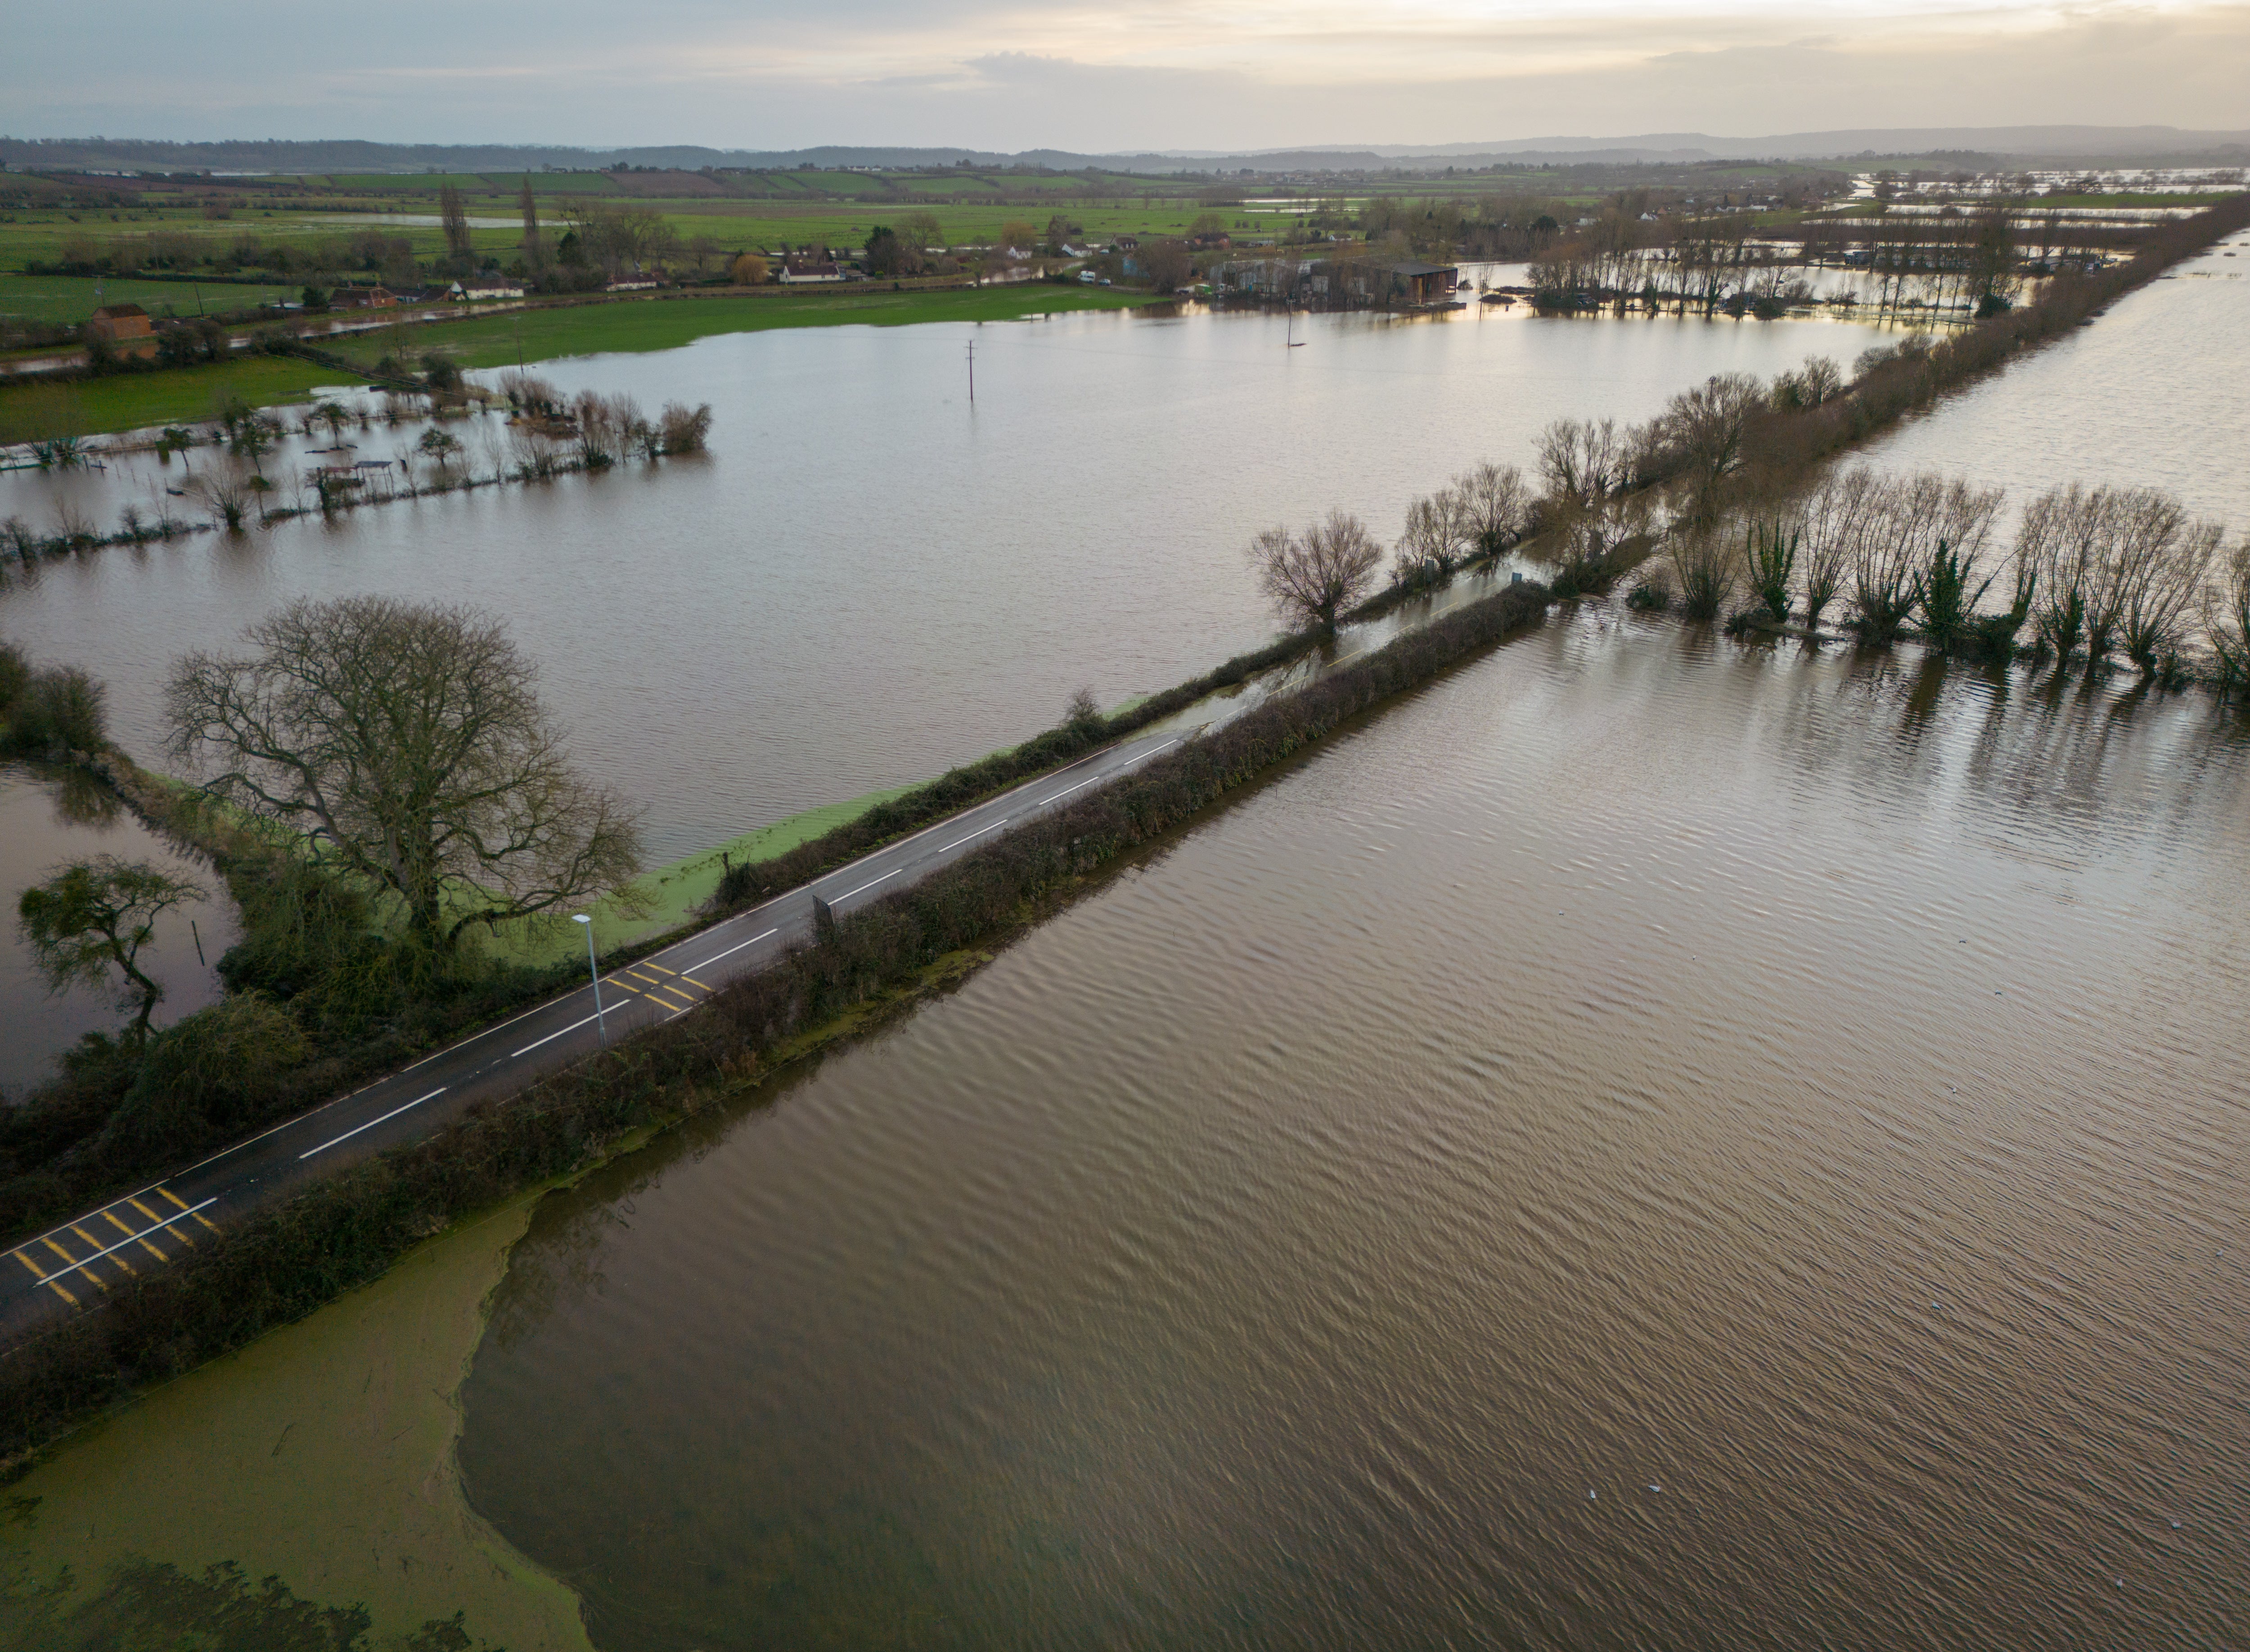 Expect more floods like this one in Somerset